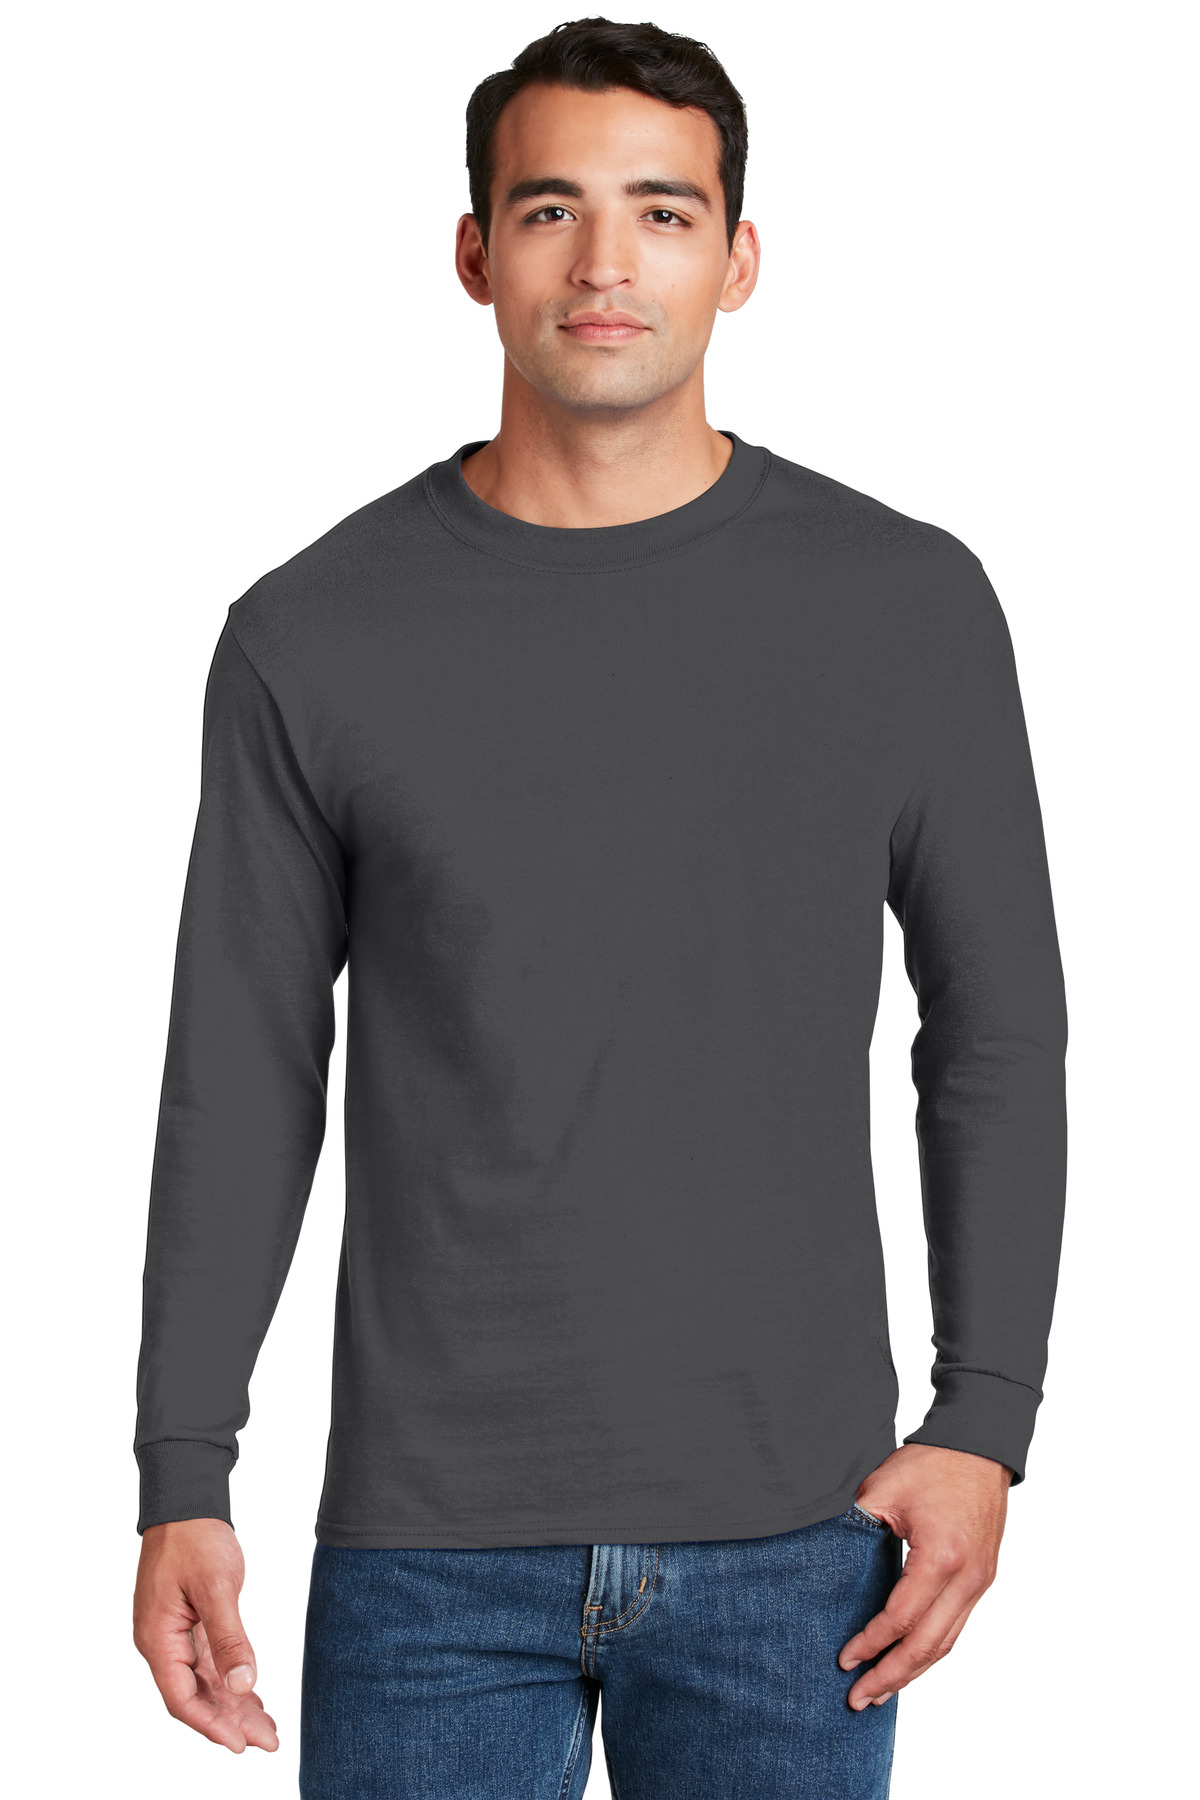 Hanes Beefy-T - 100% Cotton Long Sleeve T-Shirt - 5186